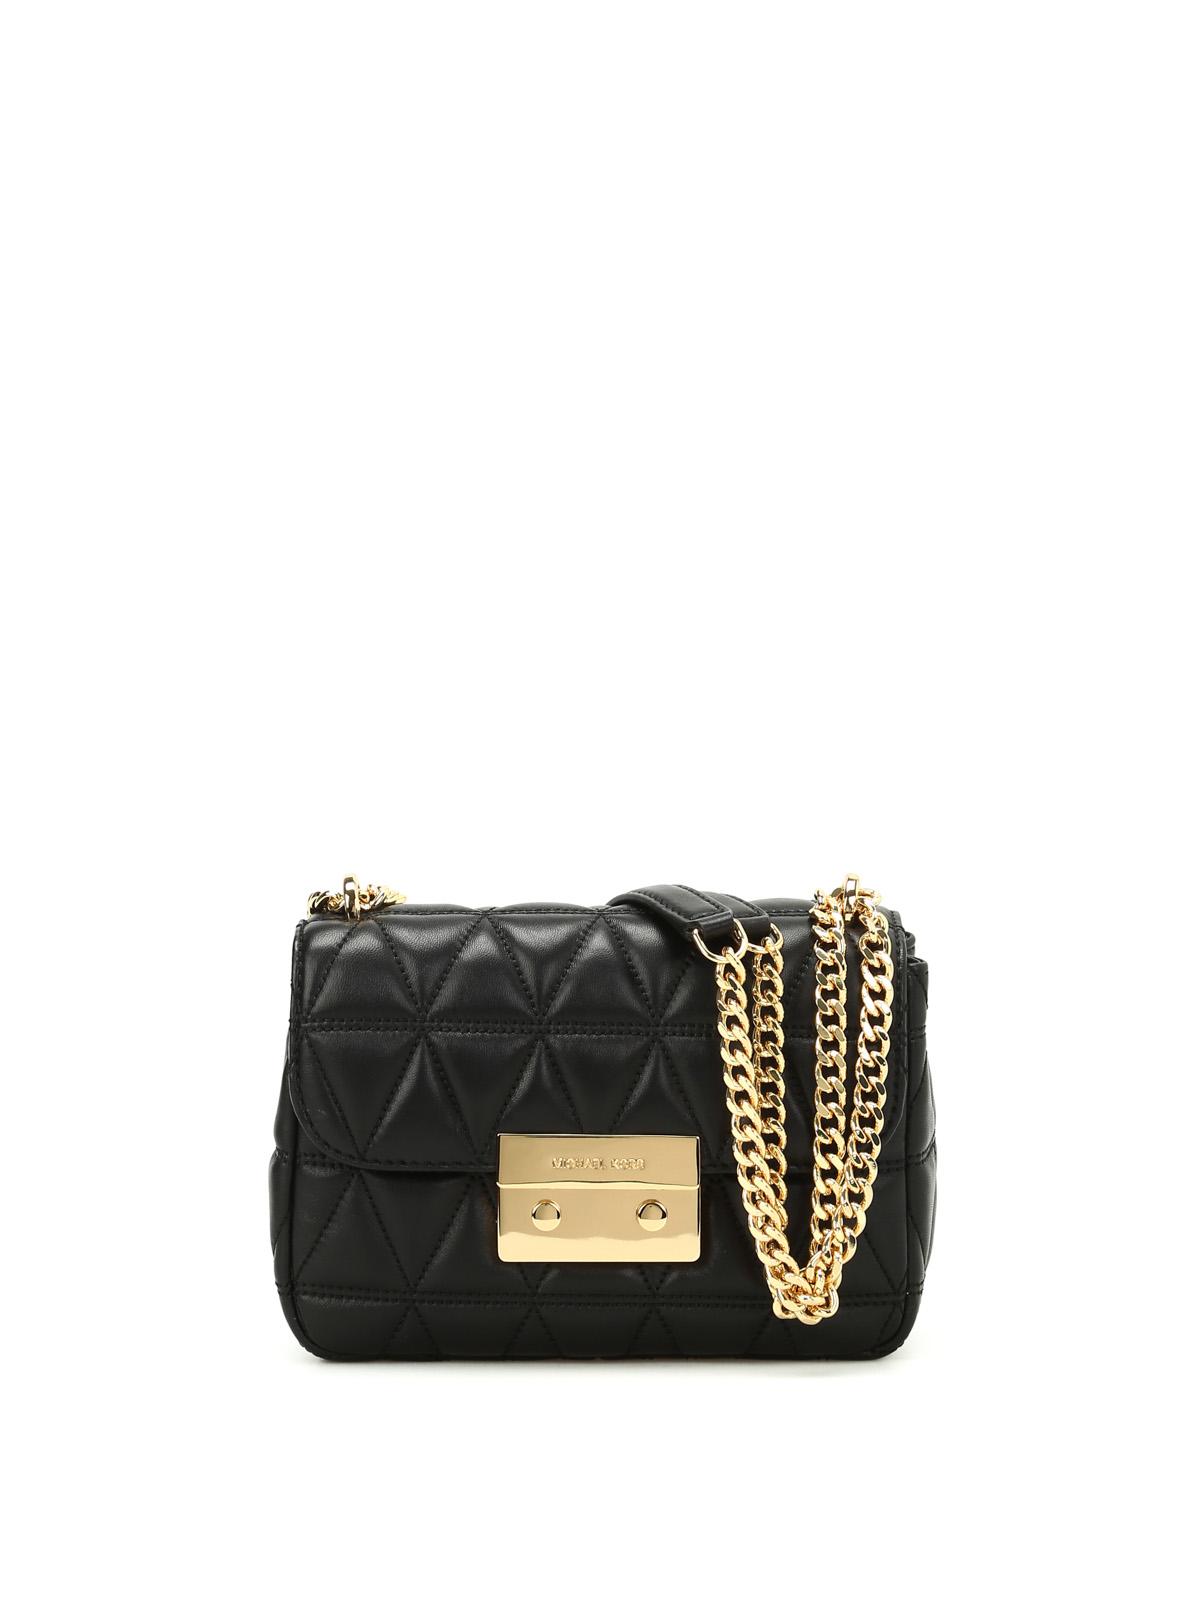 Michael Kors Leather Sloan Quilted Small Shoulder Bag in Black - Lyst